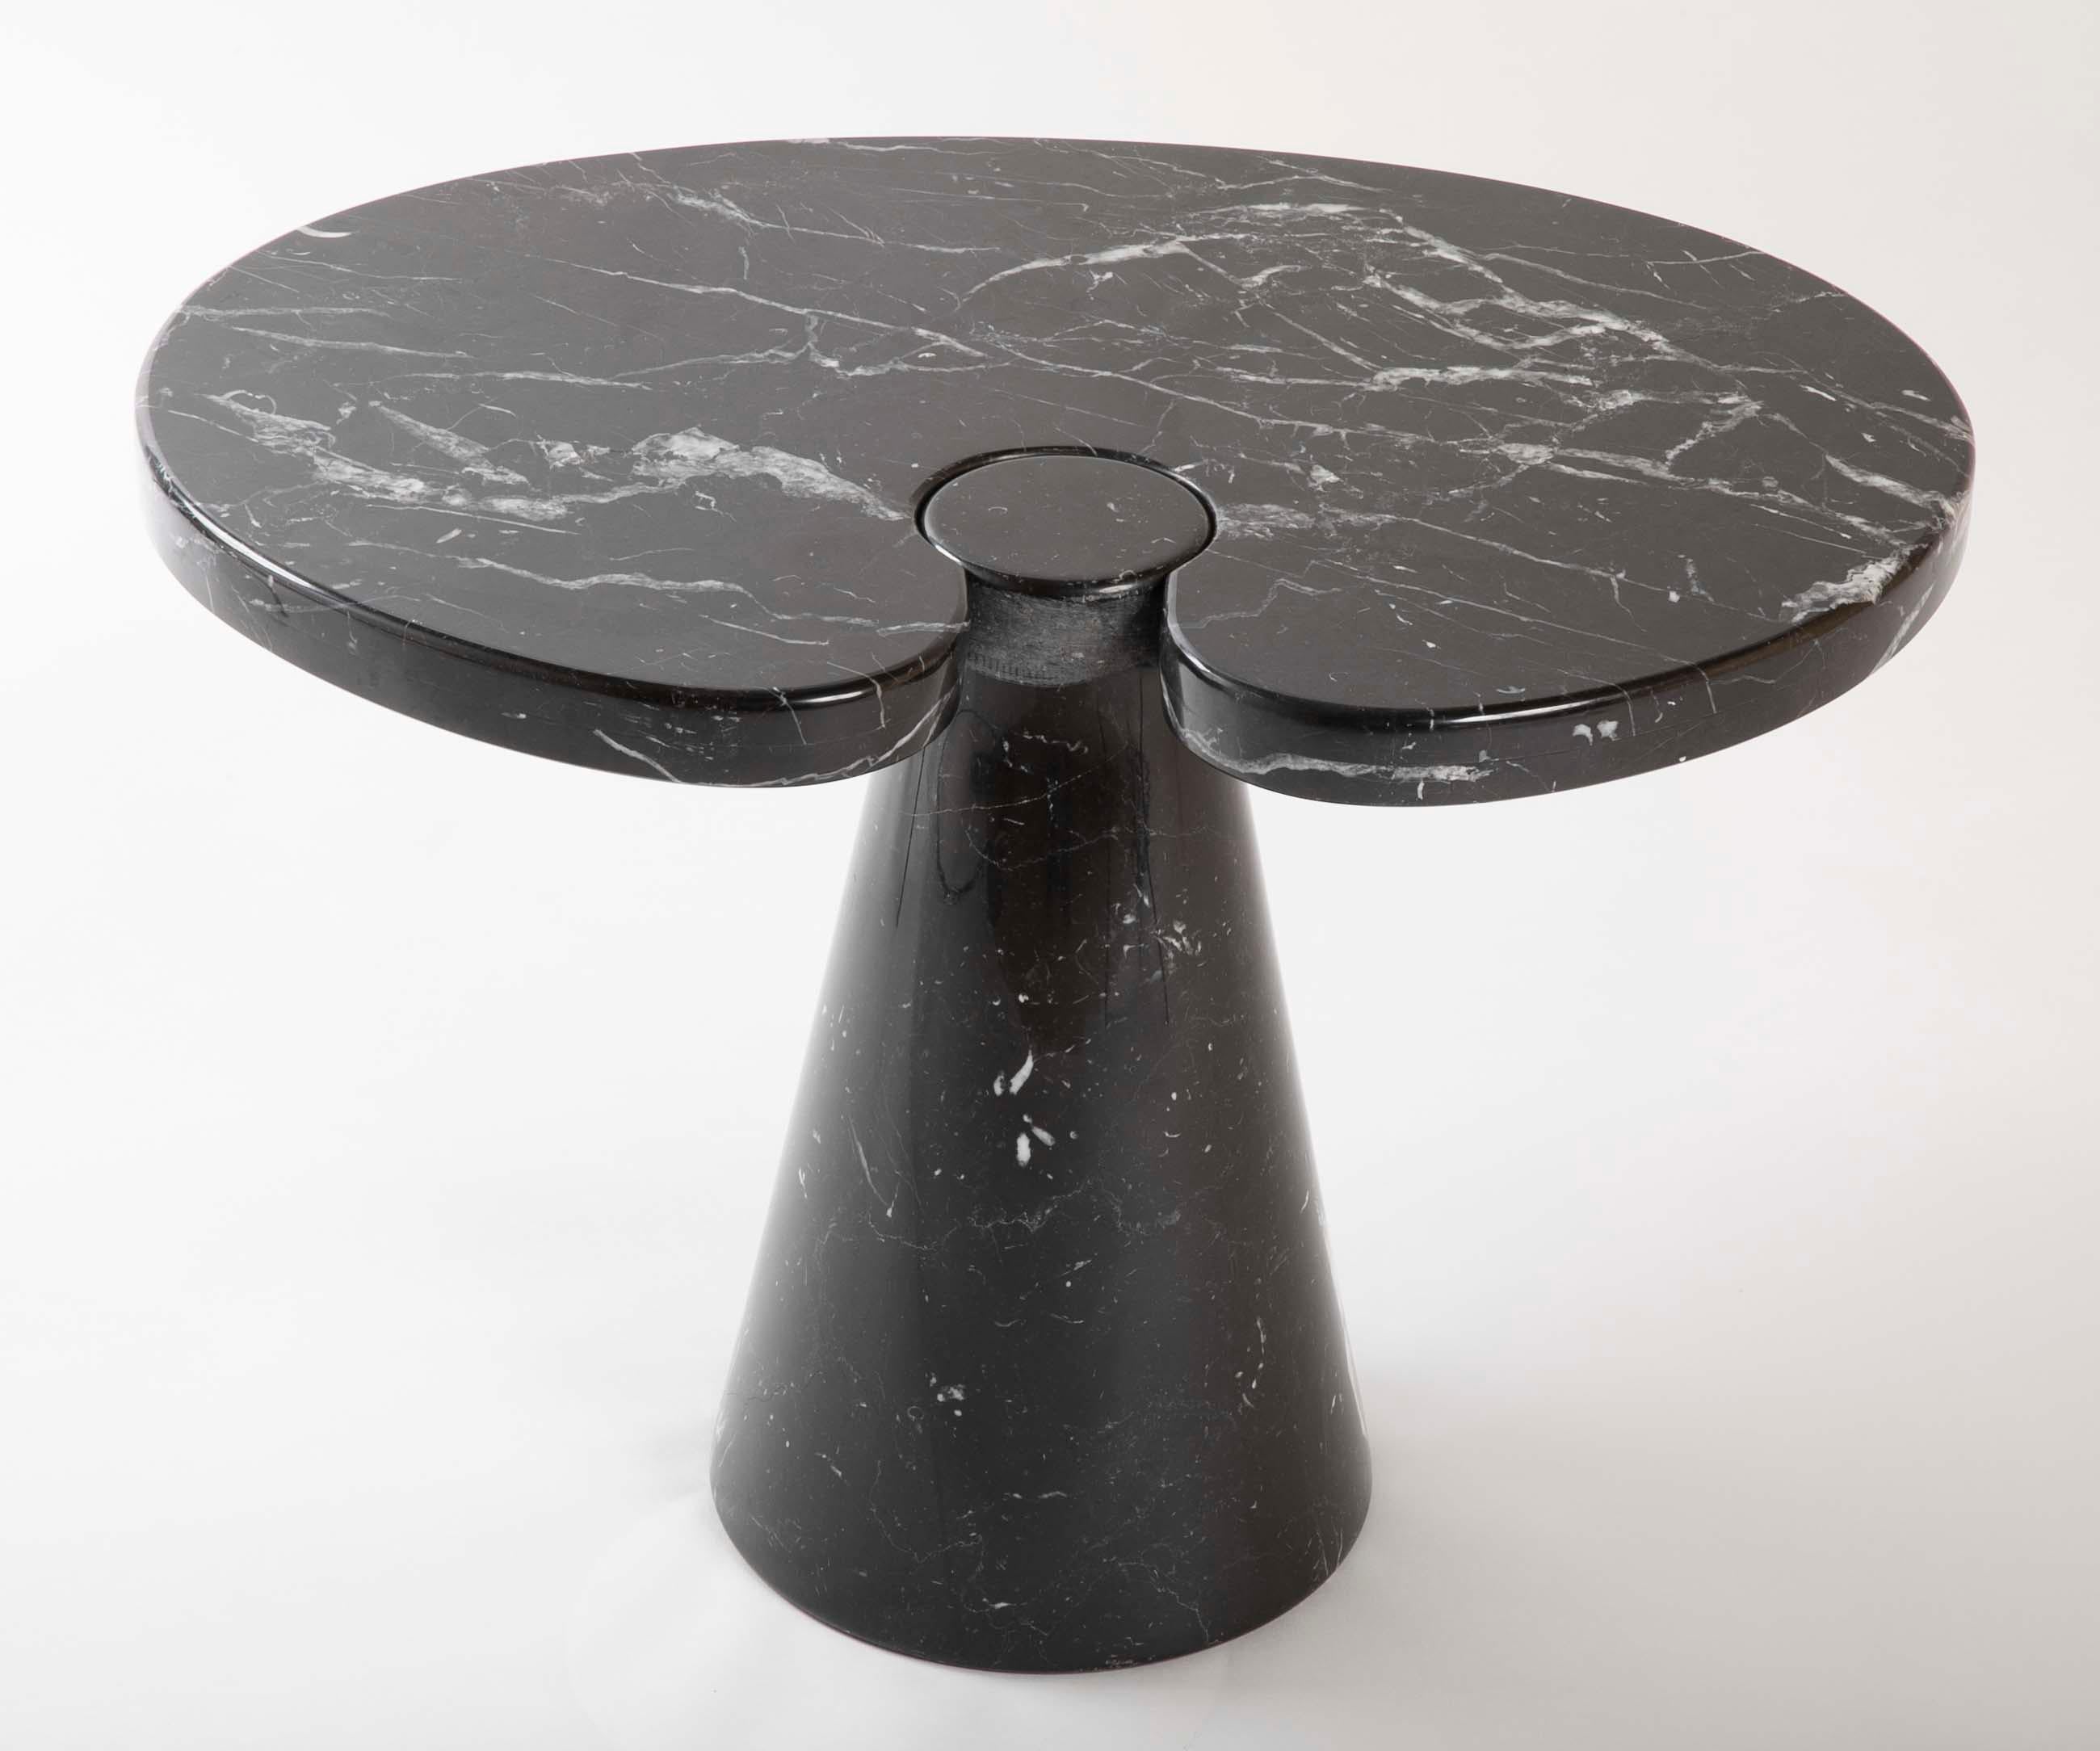 Organic Form Nero Marquina Marble Side Table Designed by Angelo Mangiarotti 1